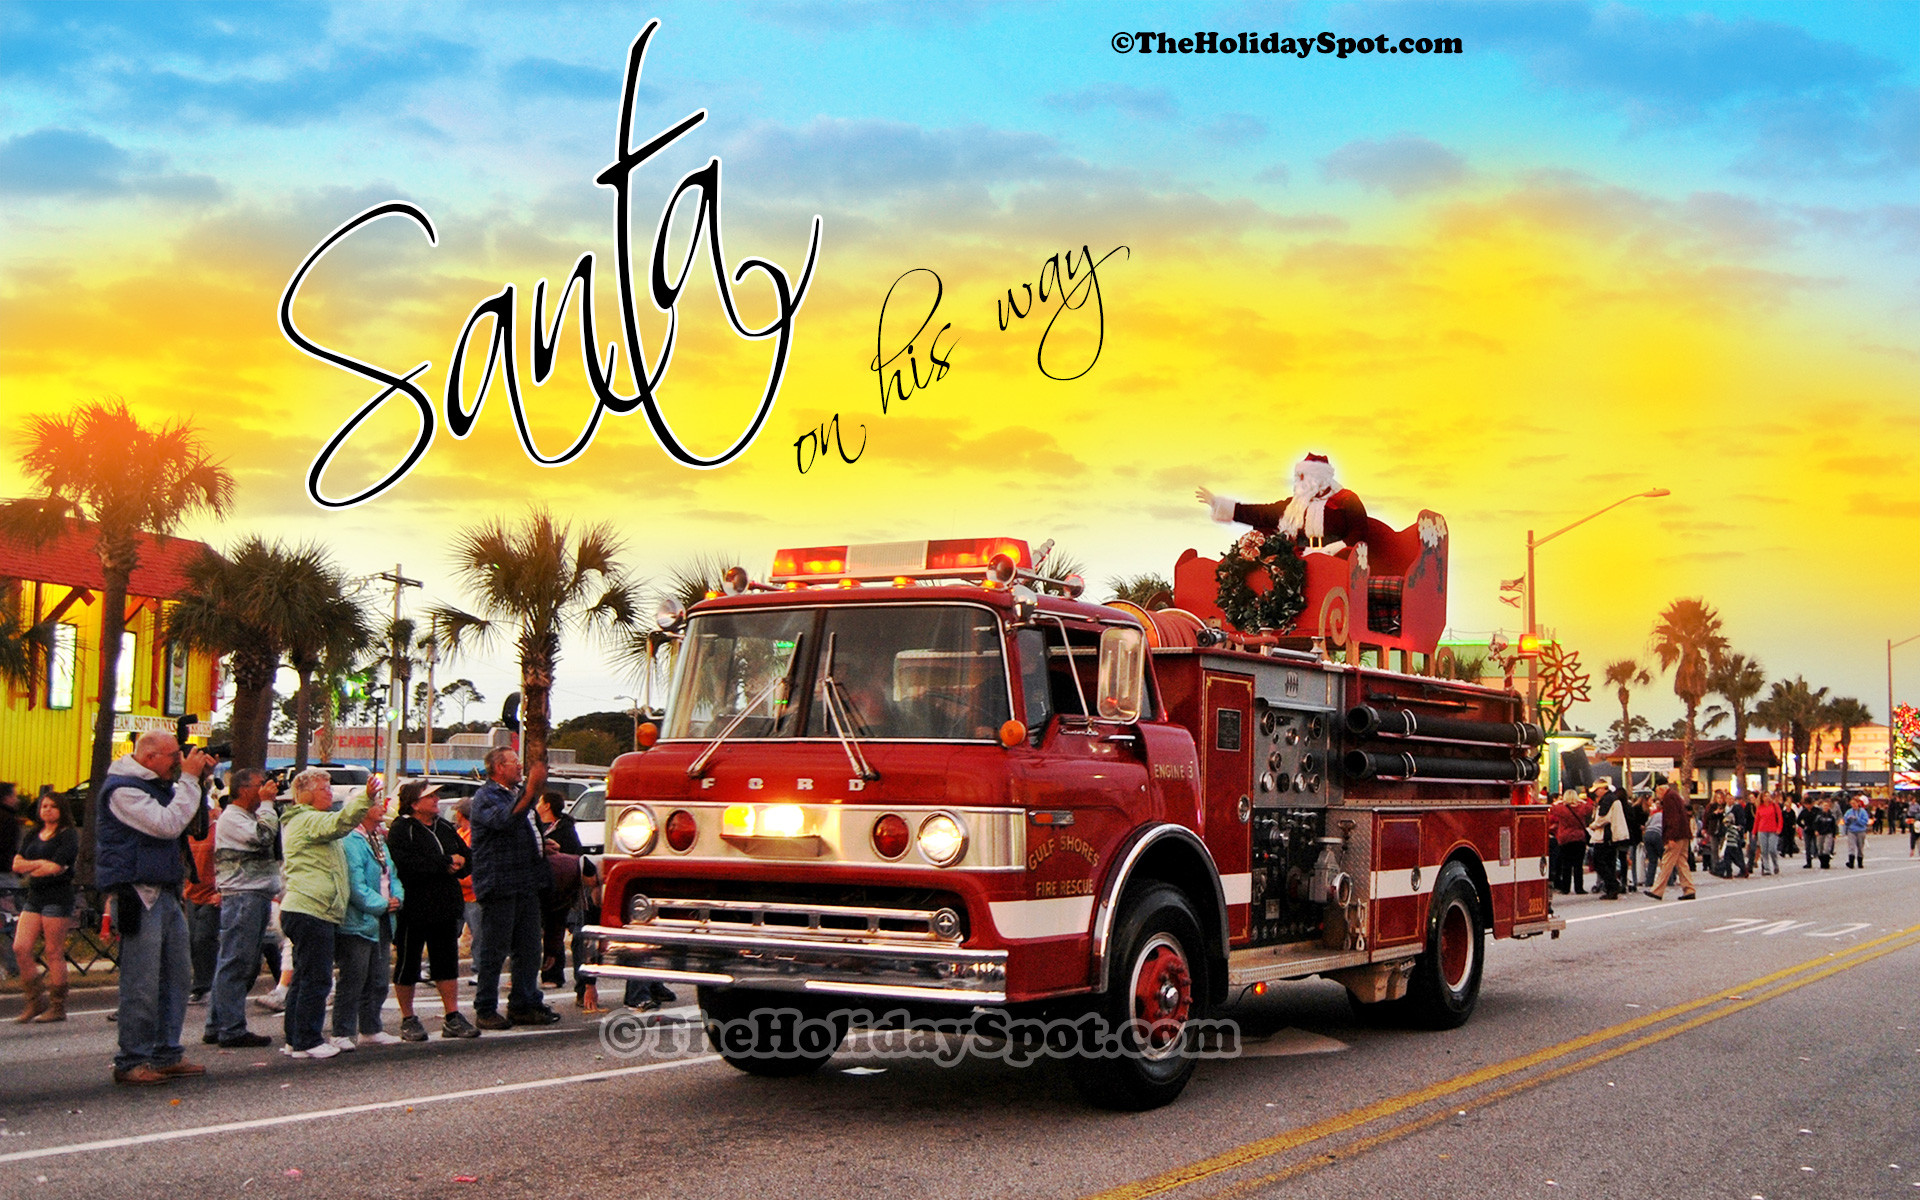 Christmas wallpaper of Santa coming to town on a firefighter truck